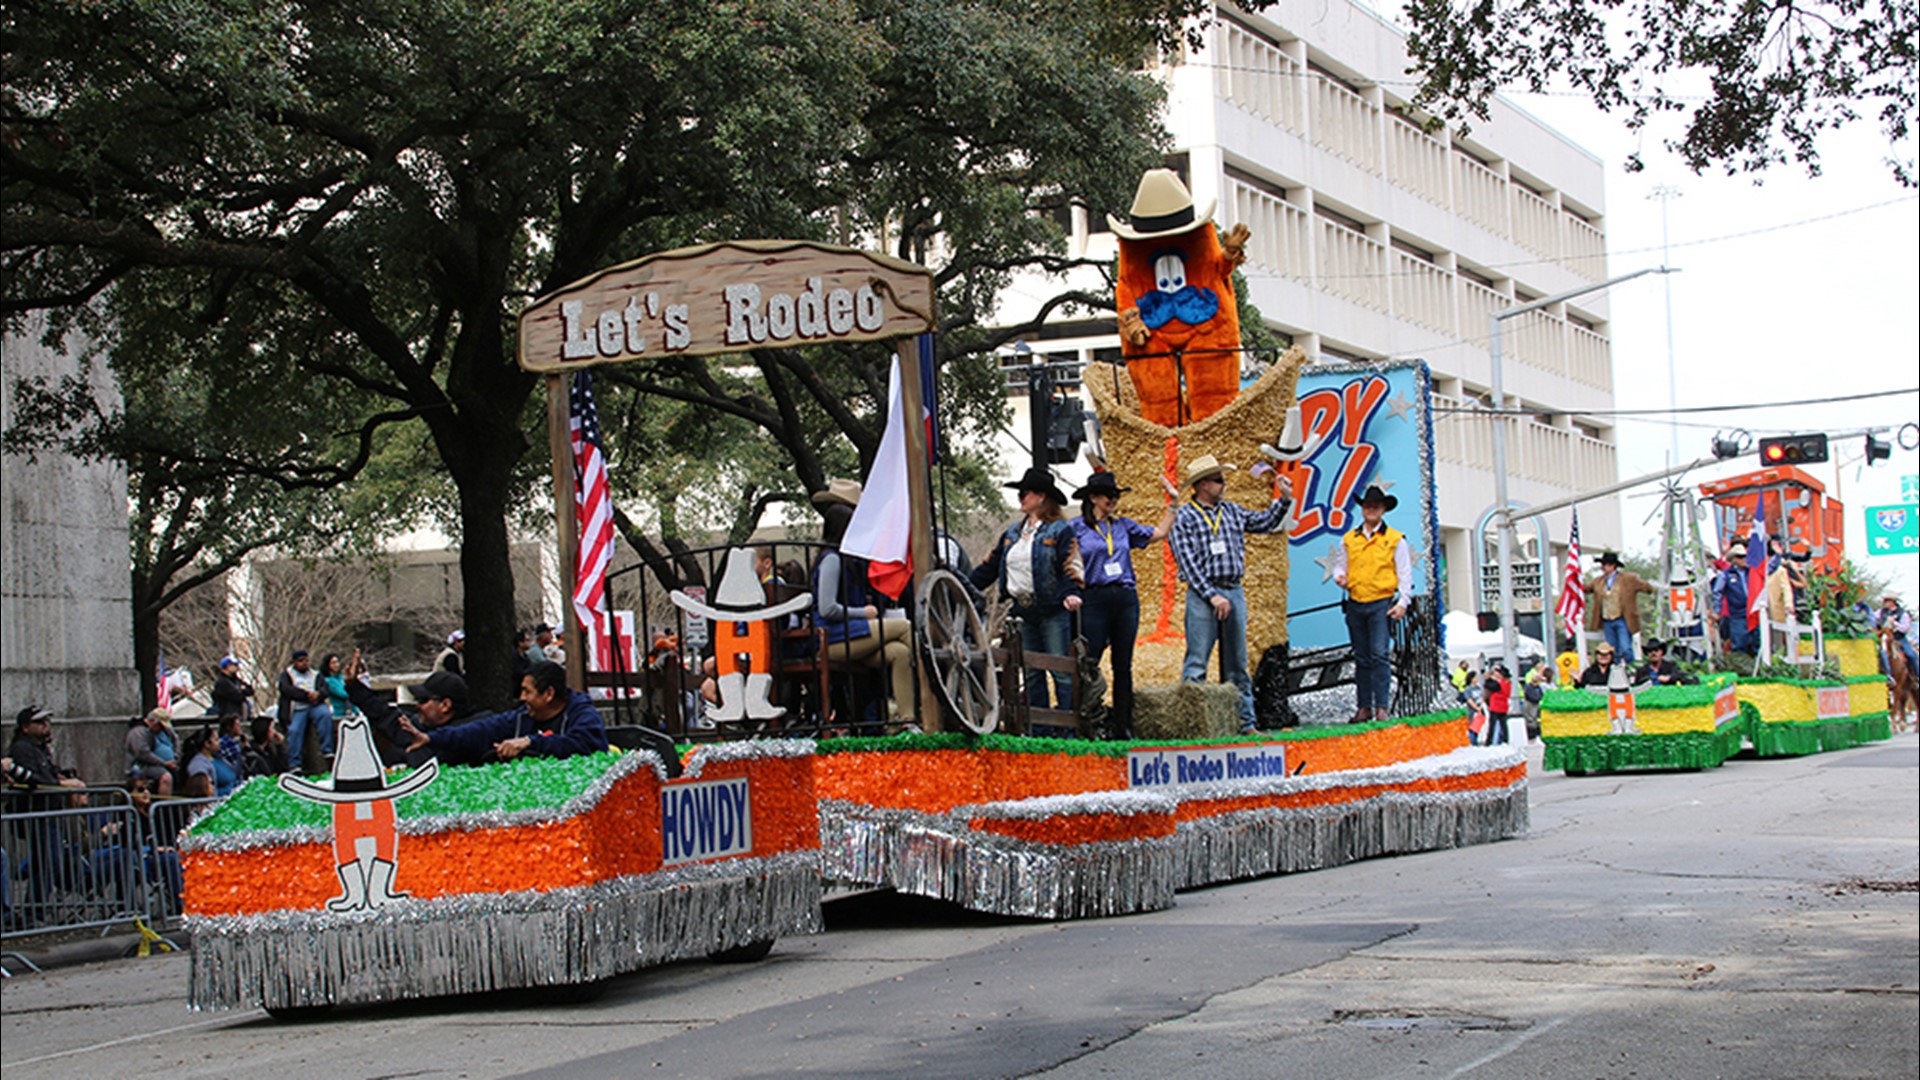 Houston Livestock Show & Rodeo announces dates for parade, BBQ cookoff